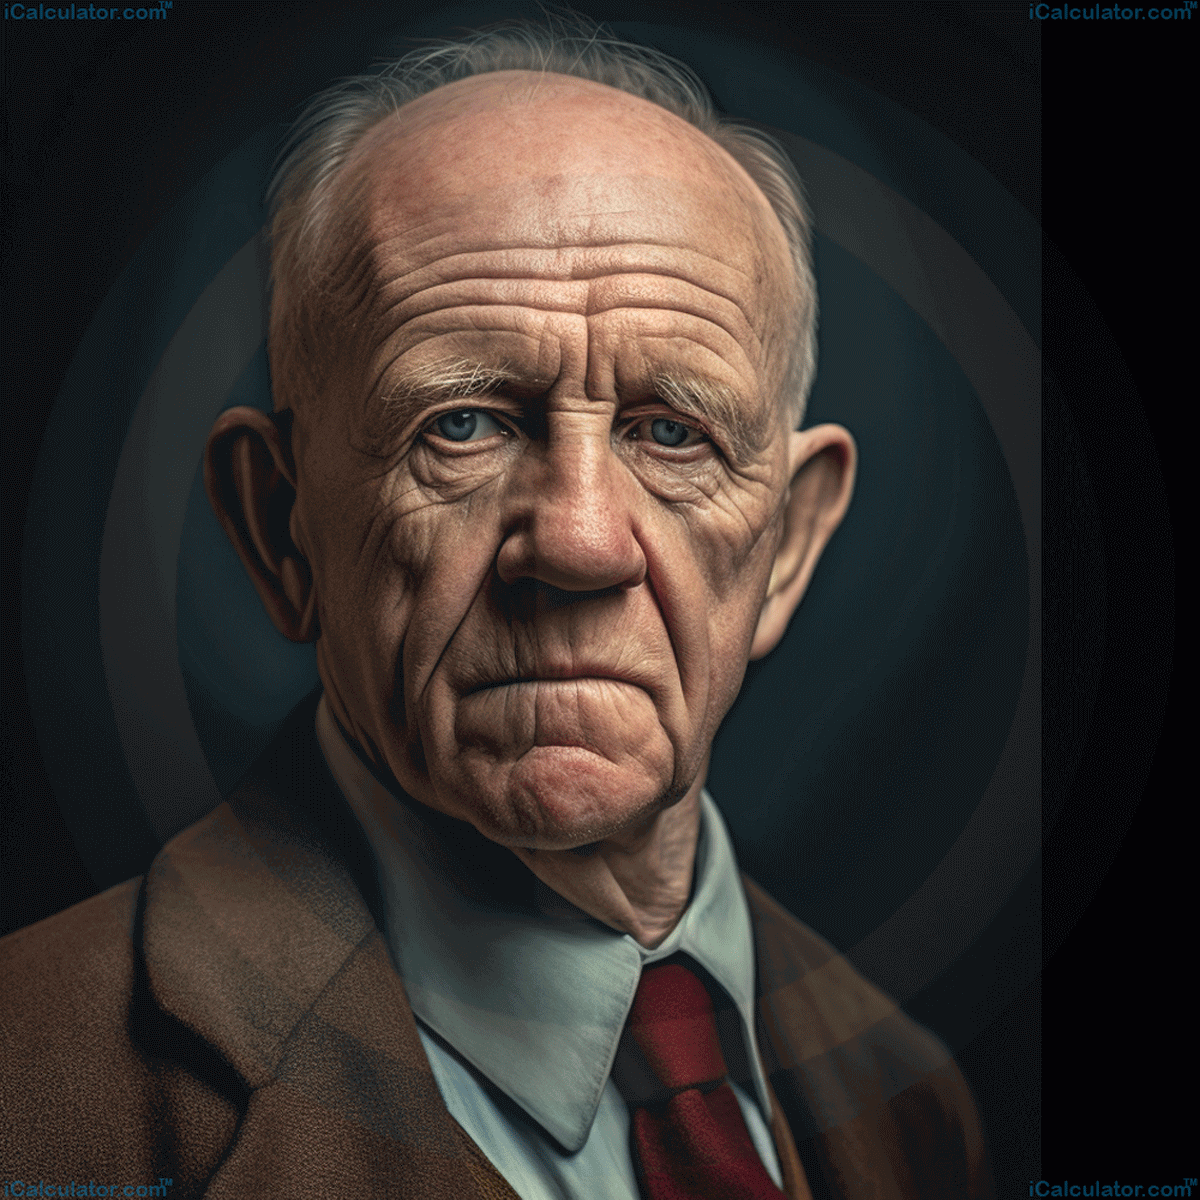 This image shows the physists Werner Heisenberg, a renowned scientist who advanced the world of phyics. Werner Heisenberg Biography